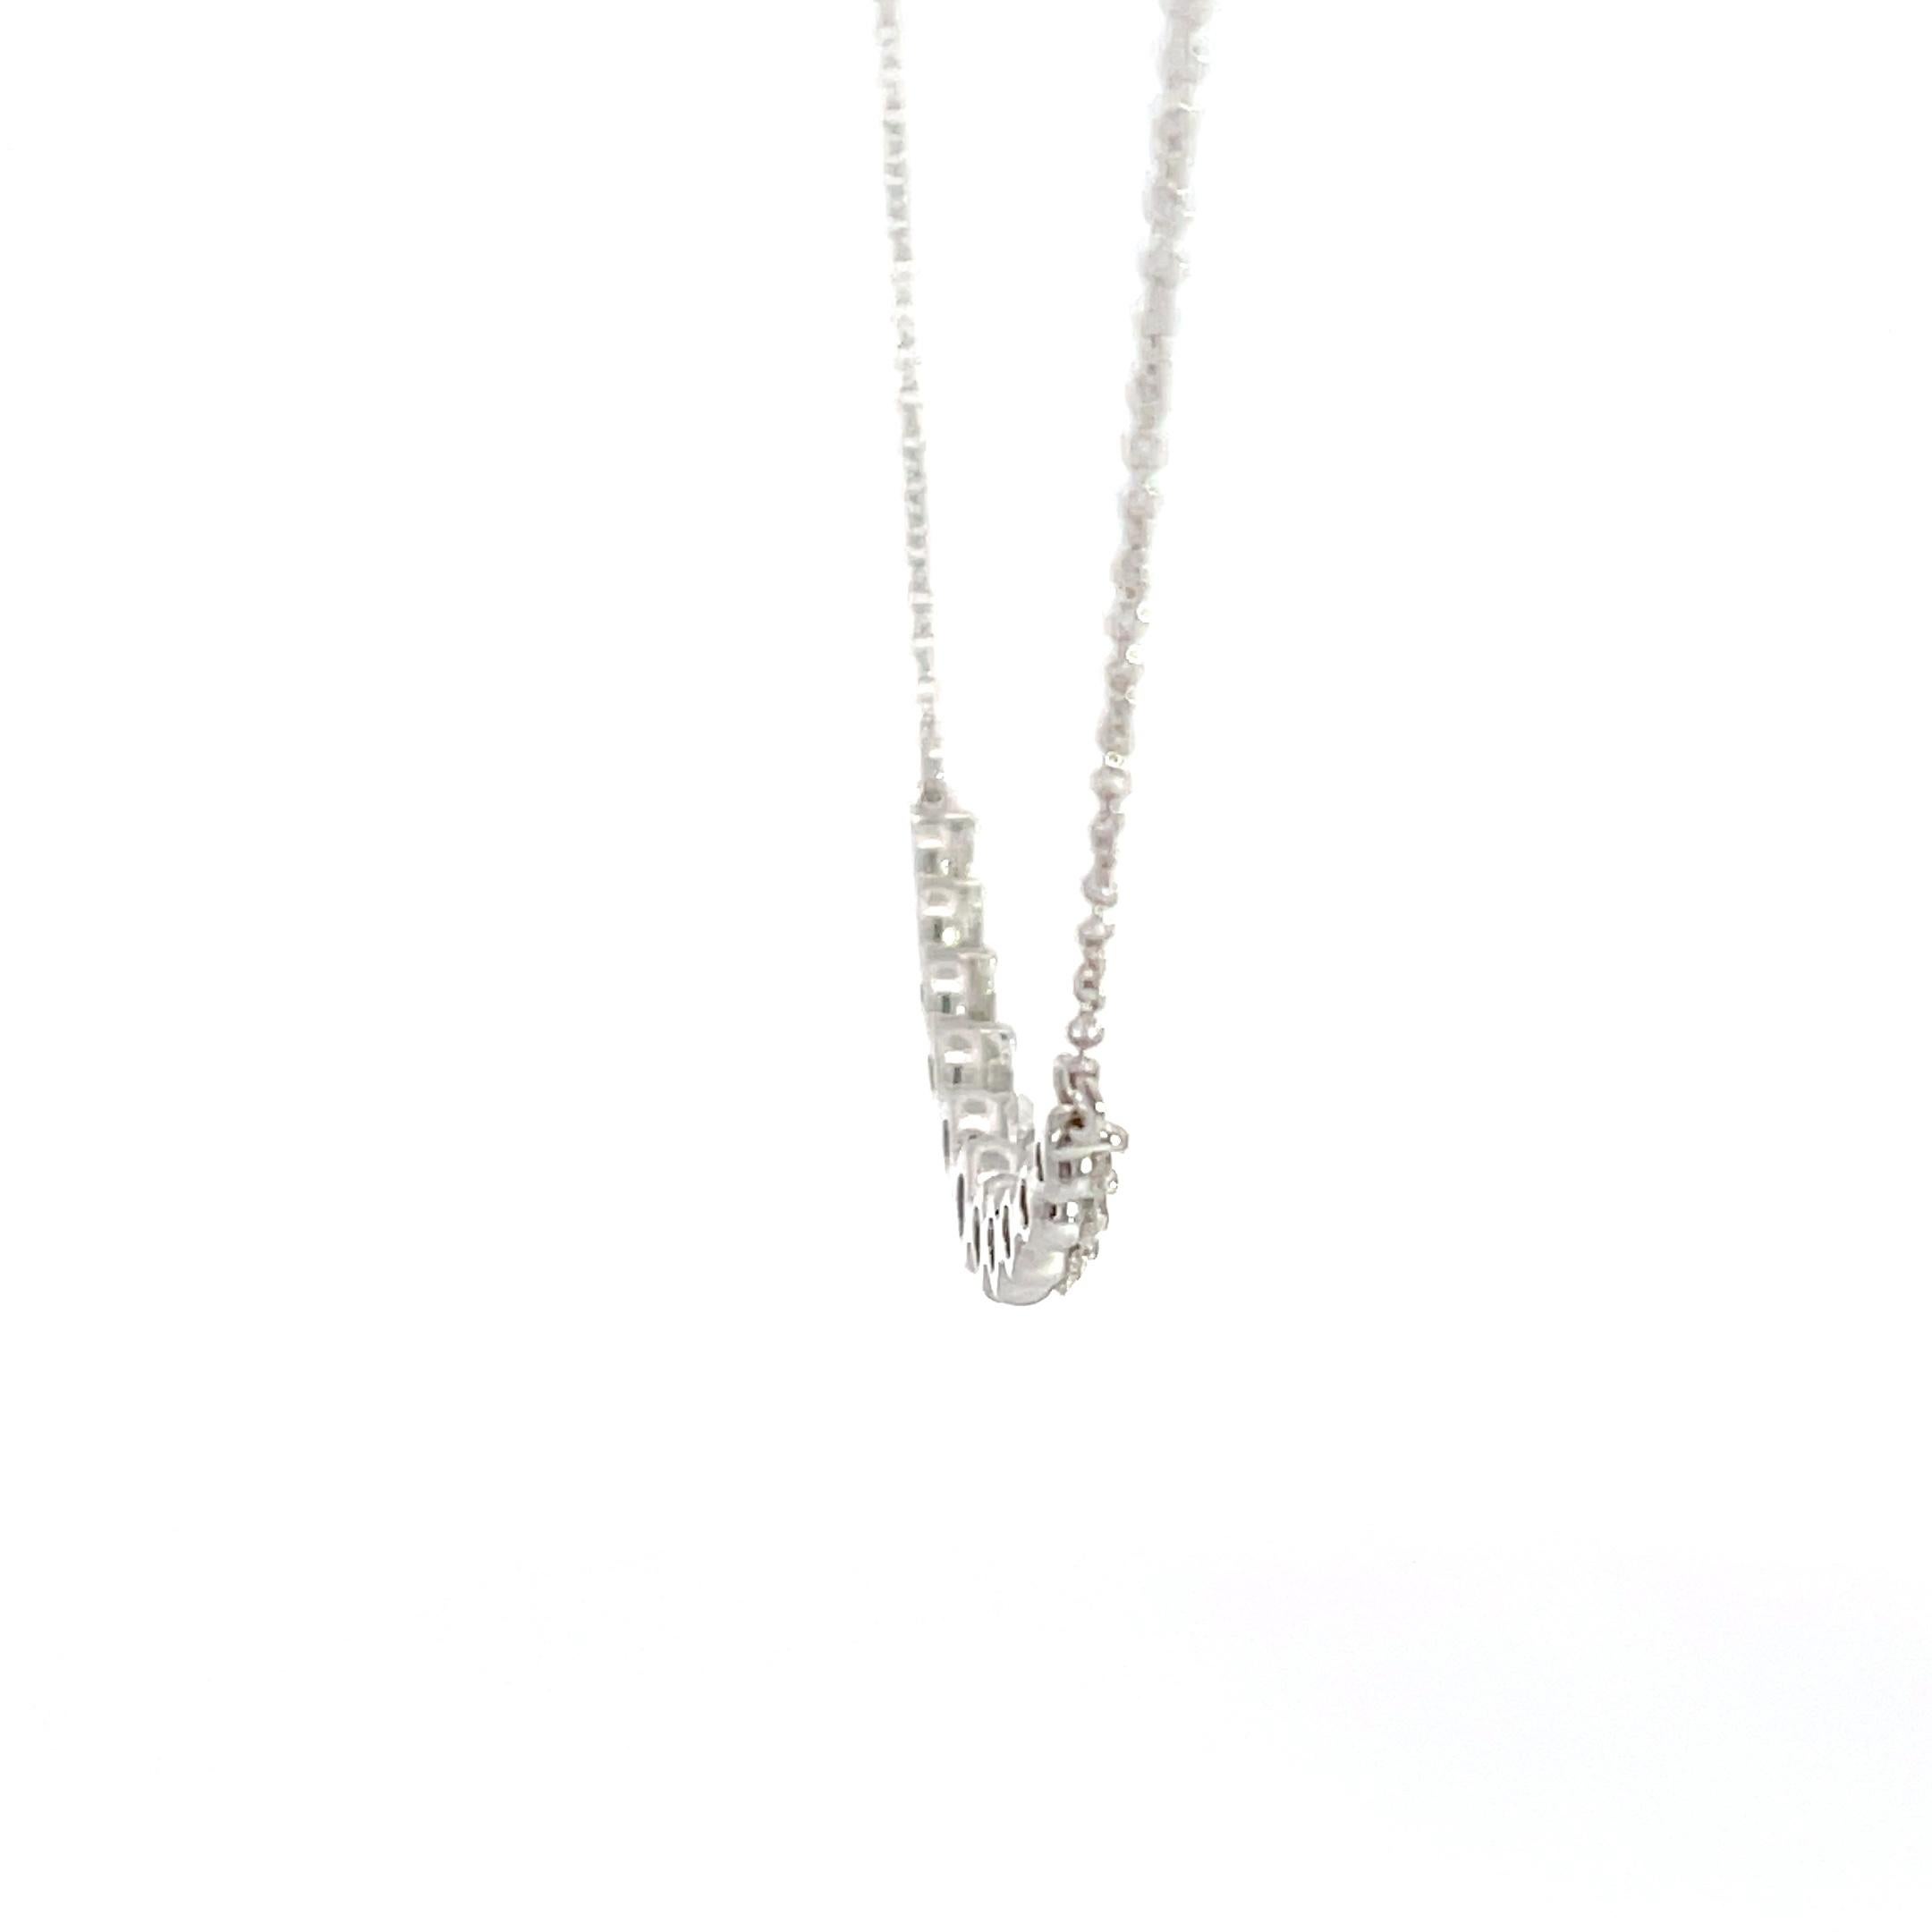 Beautiful 14K white gold diamond smile necklace. Can also be called a graduated, curved, or bar necklace. This fashion forward look can be dressed up, dressed down, and worn for any and all occasions. The diamond quality is white GH in color and SI